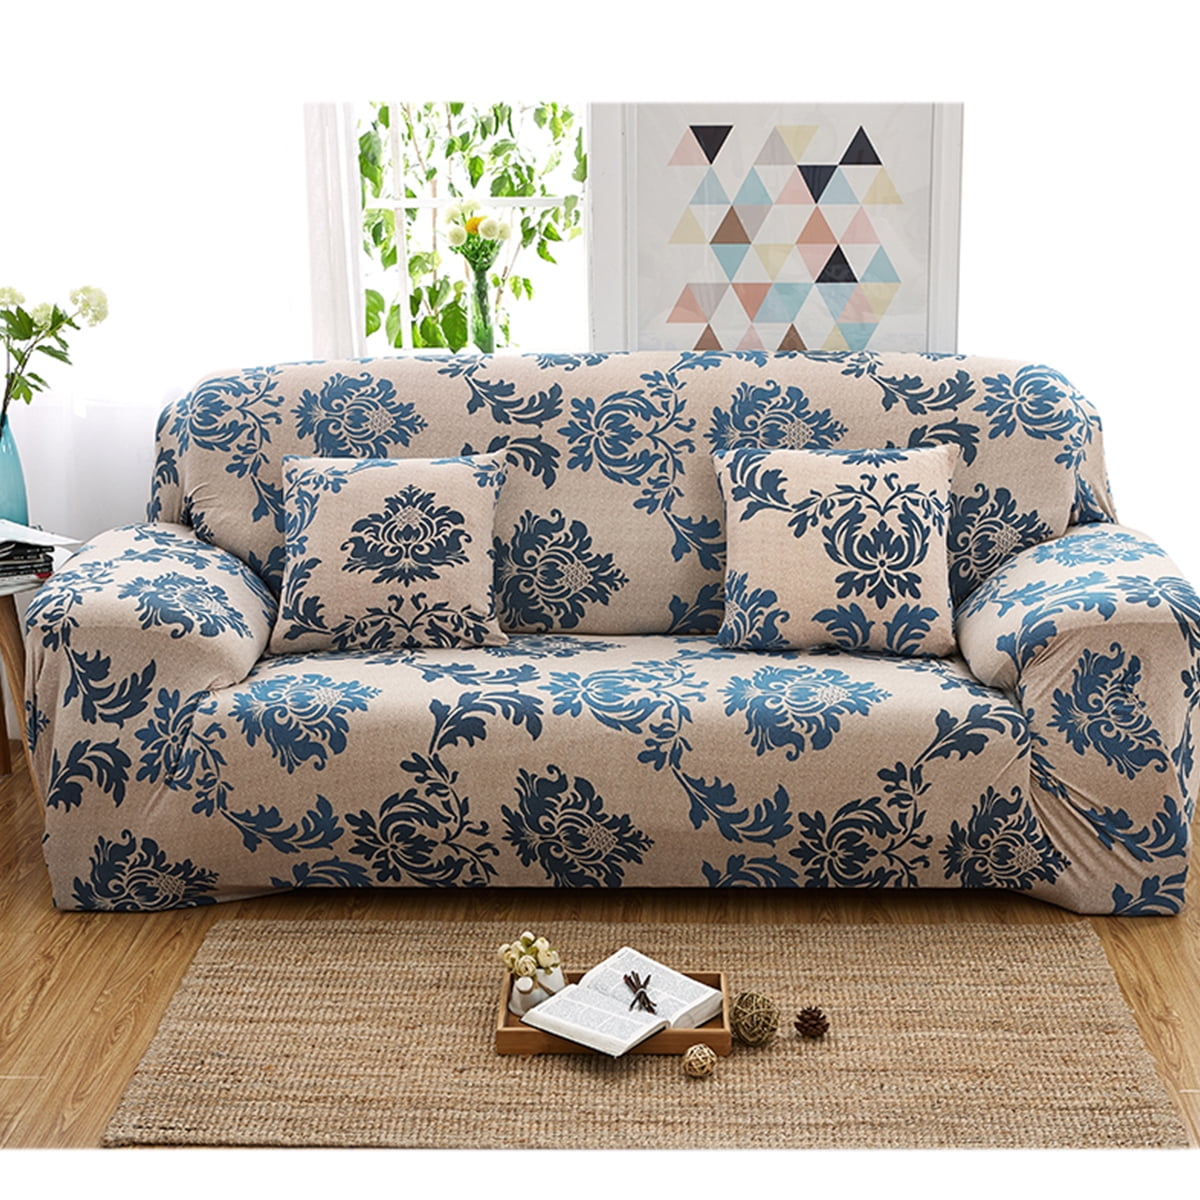 Details about   1-4 Seater Printed Slipcover Sofa Covers Spandex Stretch Cover Deer/Leaf/Feather 